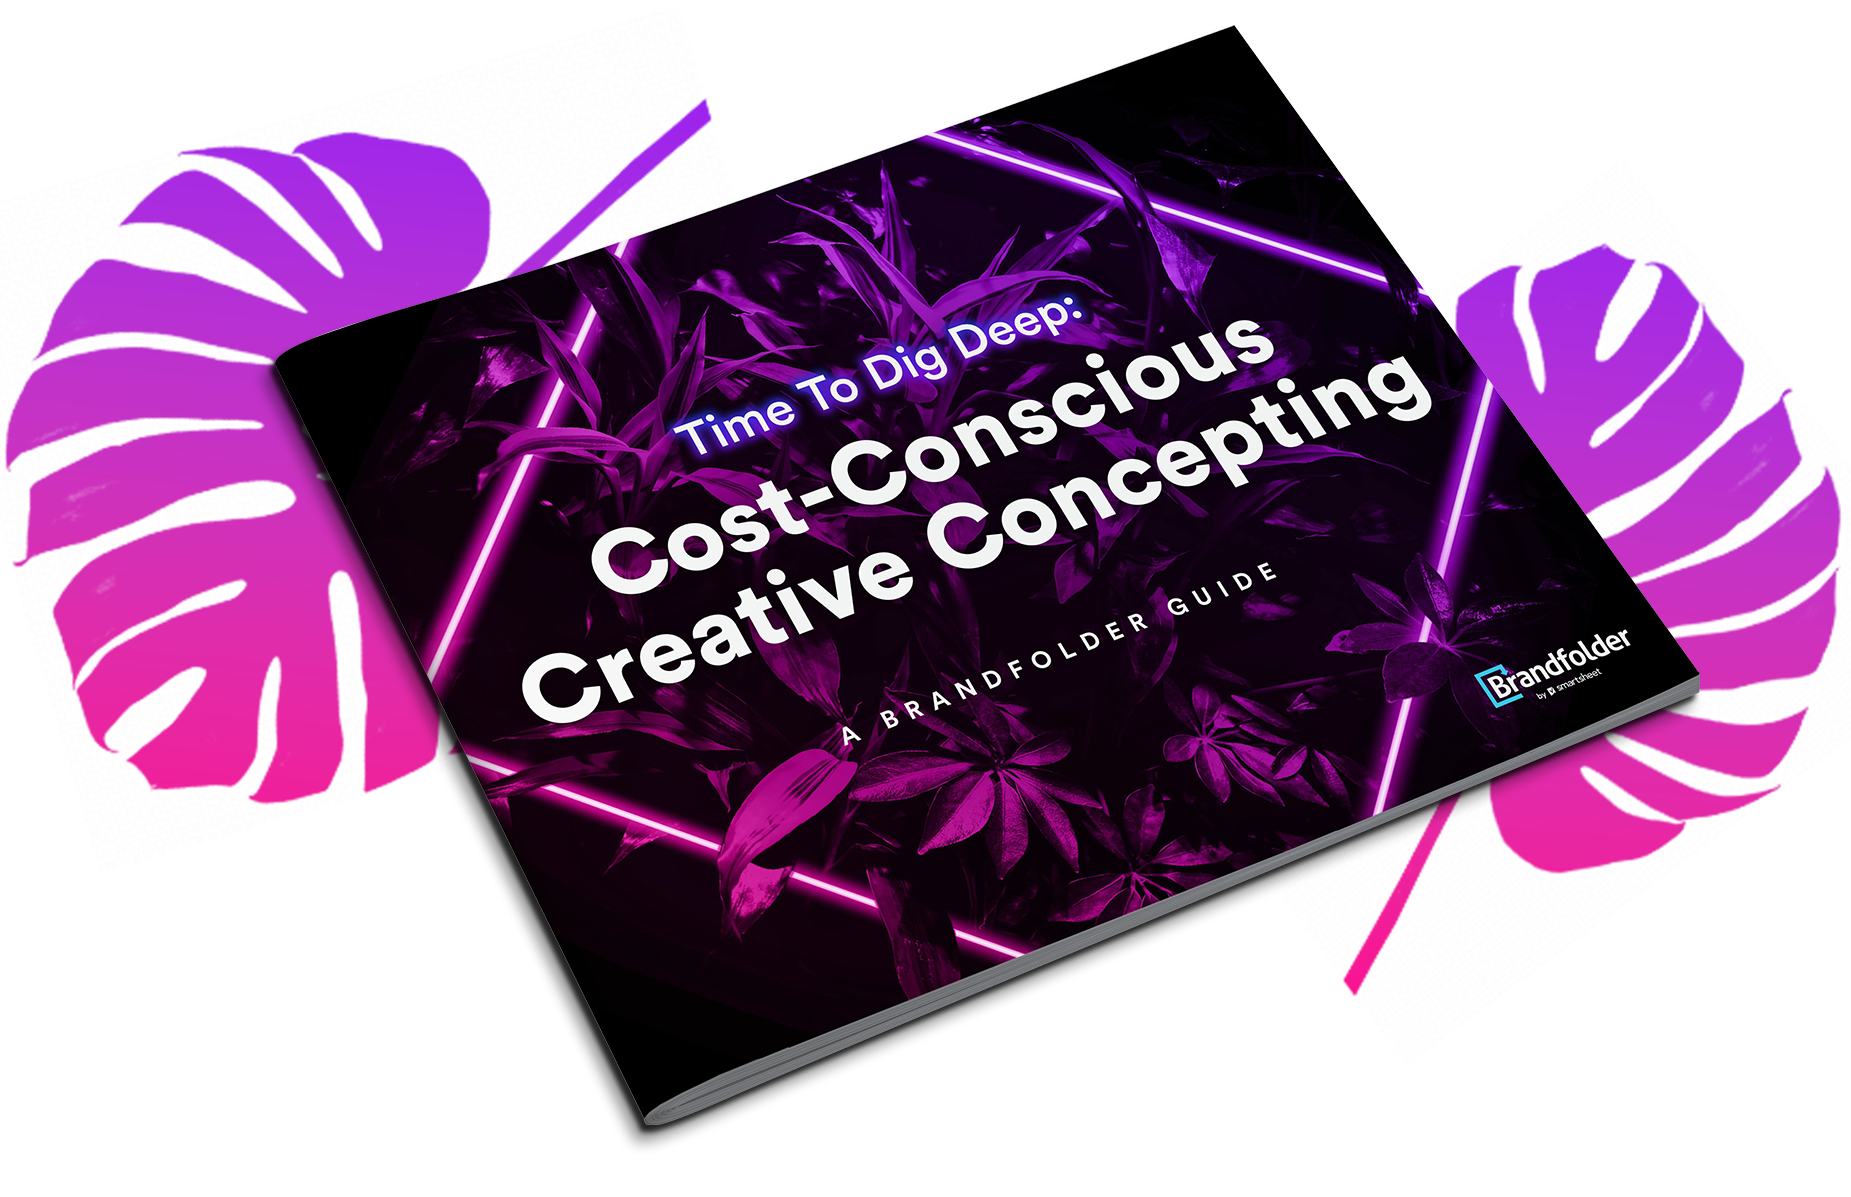 Click here to read about Cost-Conscious Creative Concepting